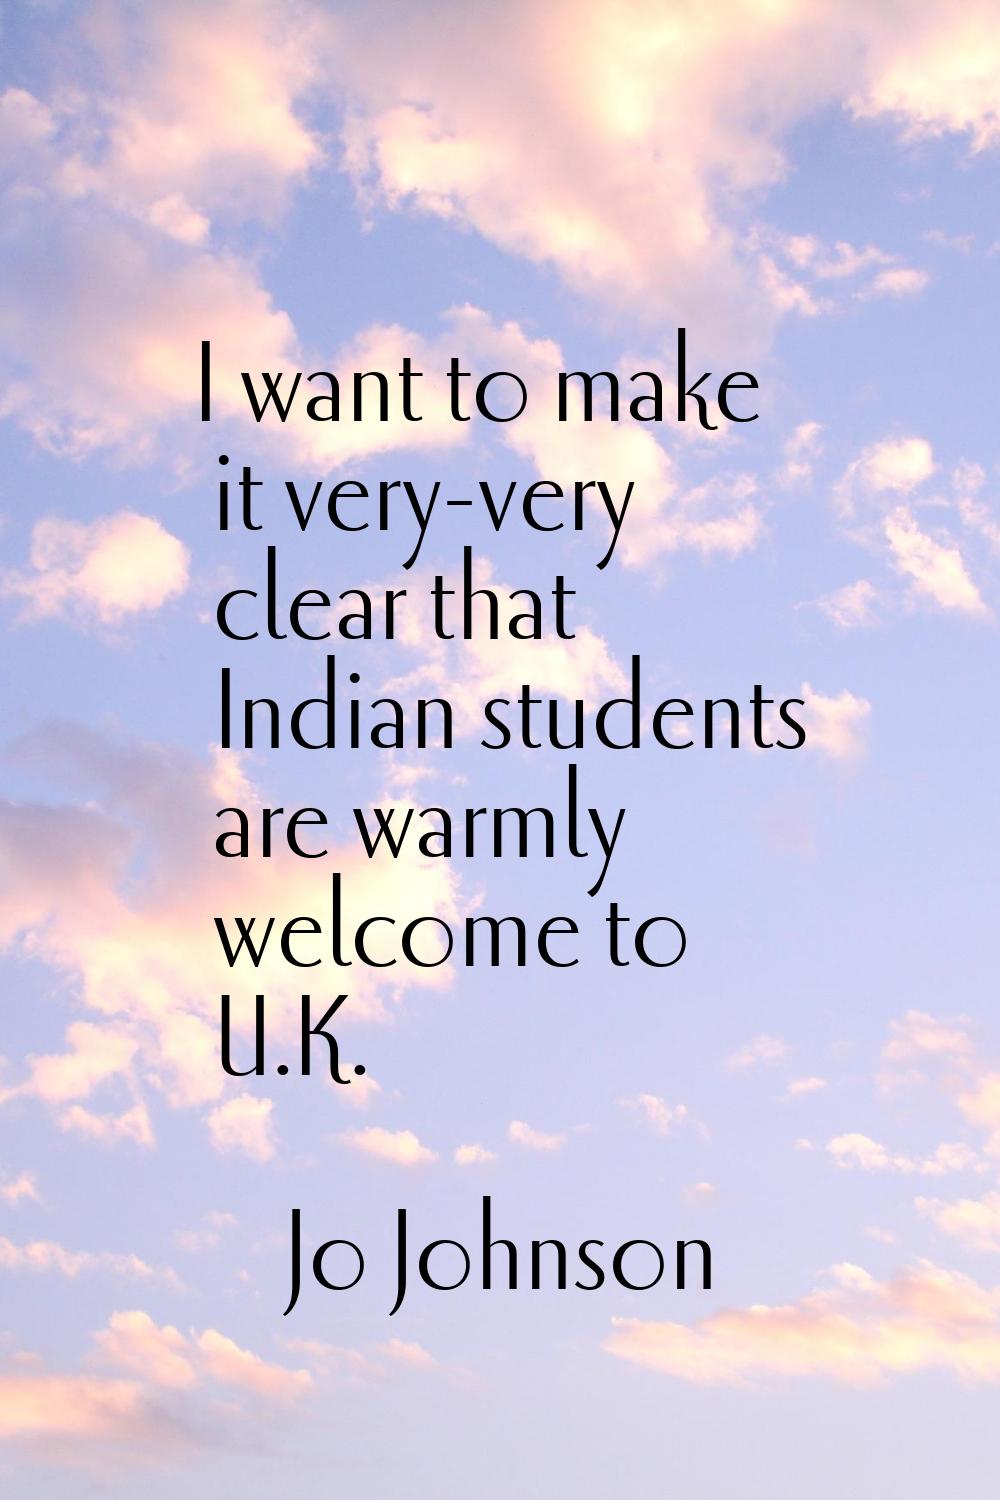 I want to make it very-very clear that Indian students are warmly welcome to U.K.